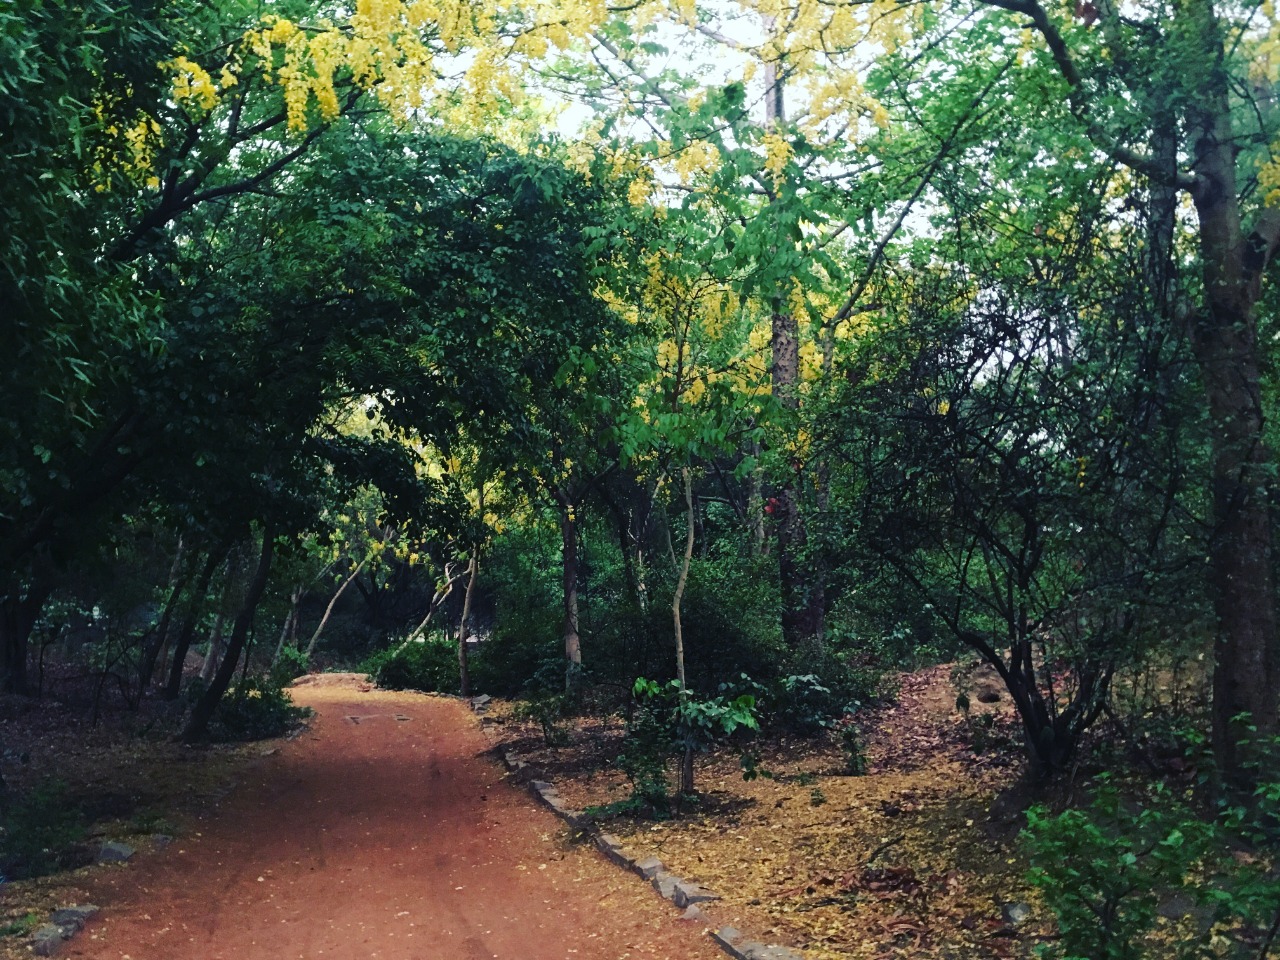 Celebrating World Heritage Day - A Nature Trail to Sanjay Van Forest |  India Heritage Walks